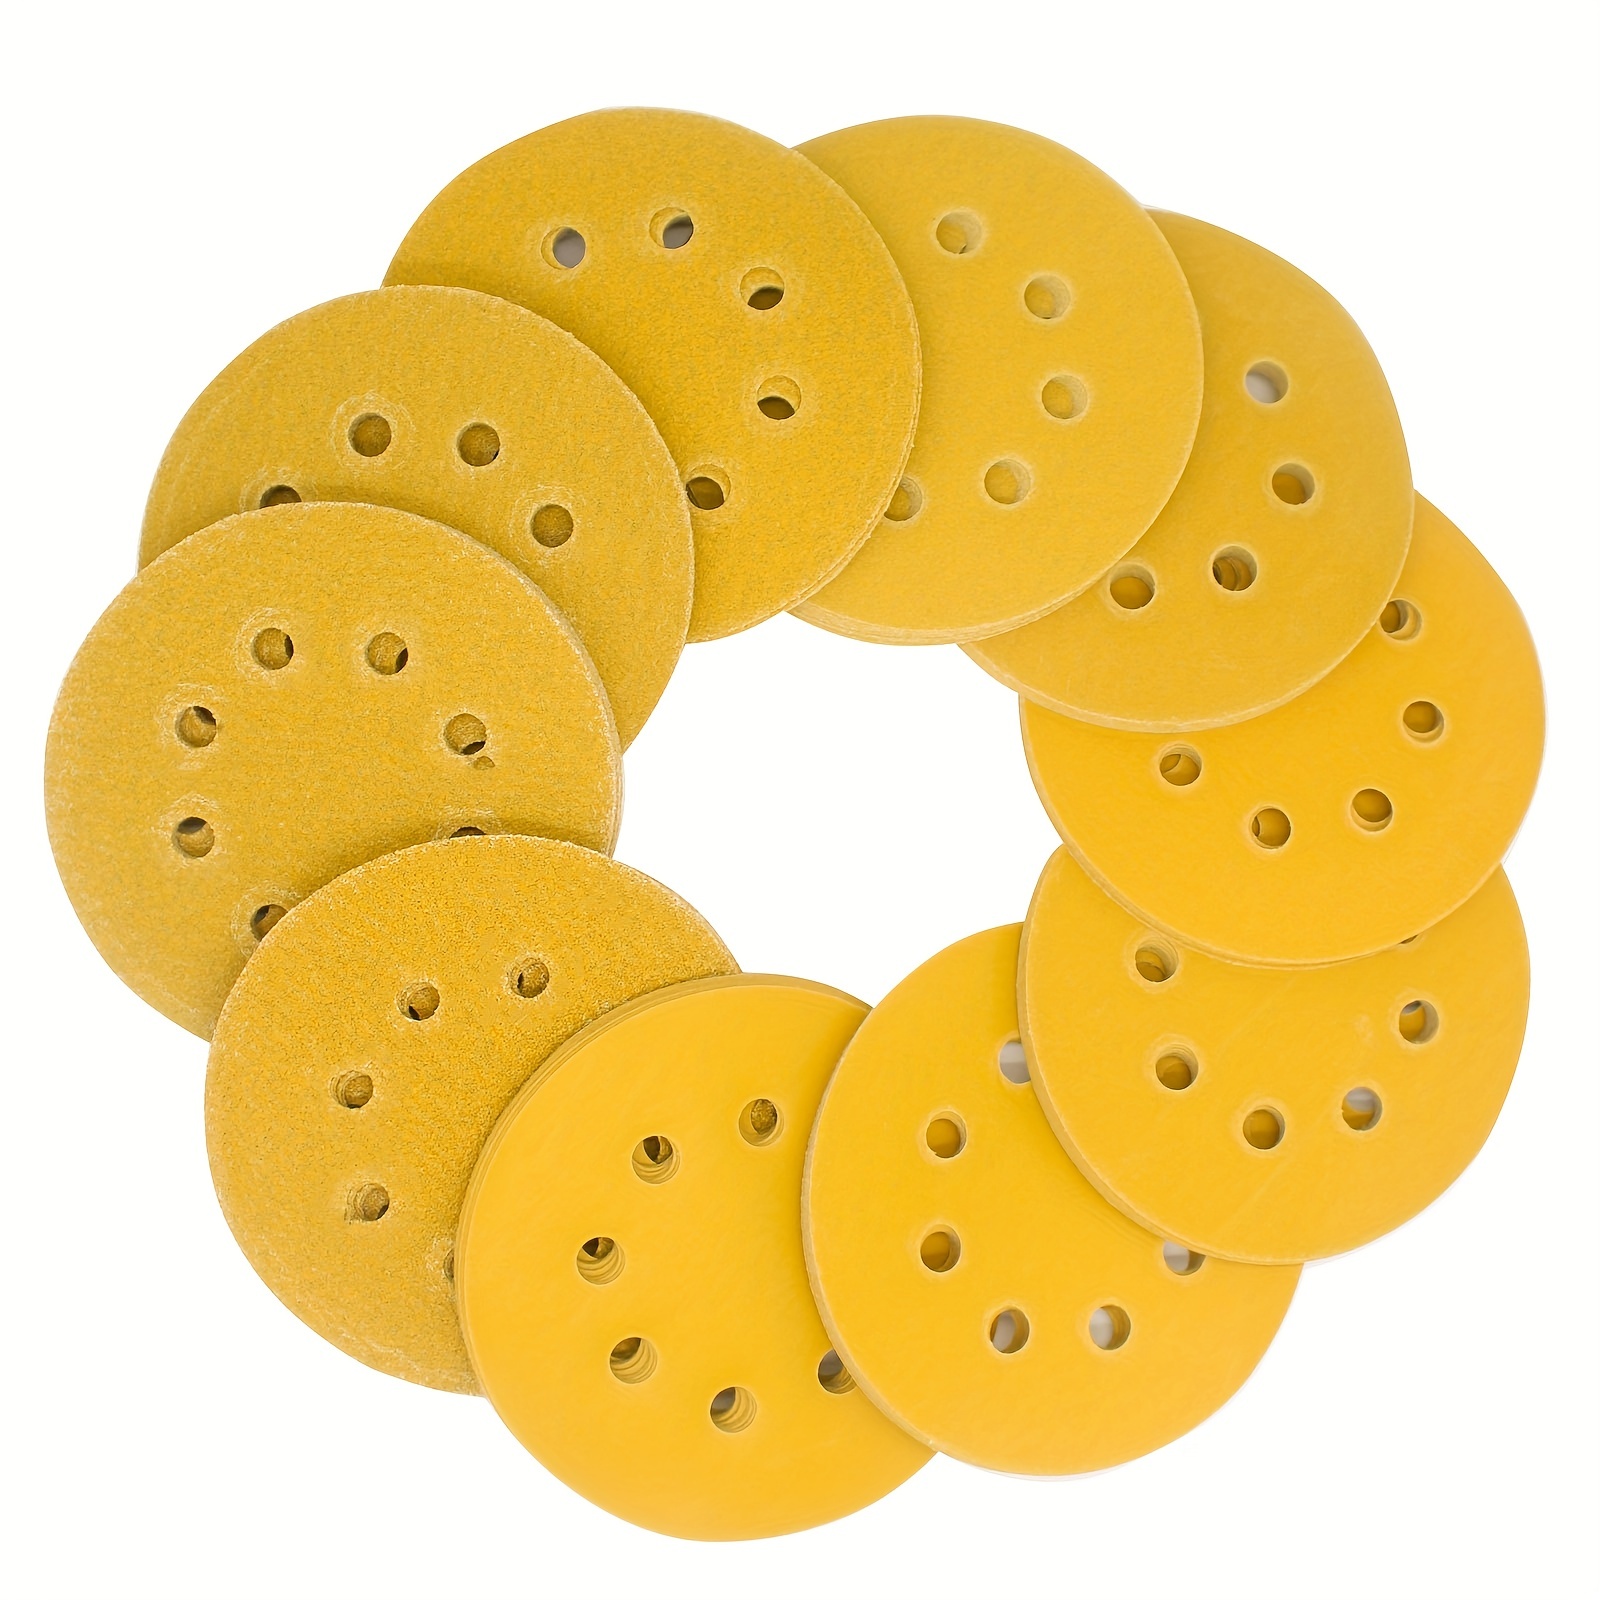 

10pcs 125mm Sanding Disc 8 Holes, Hook And Loop Discs Sandpaper 9 Inches, Grinding Wheels Diameter 125mm, Red Punched.for Drywall Sander Sanding Pads